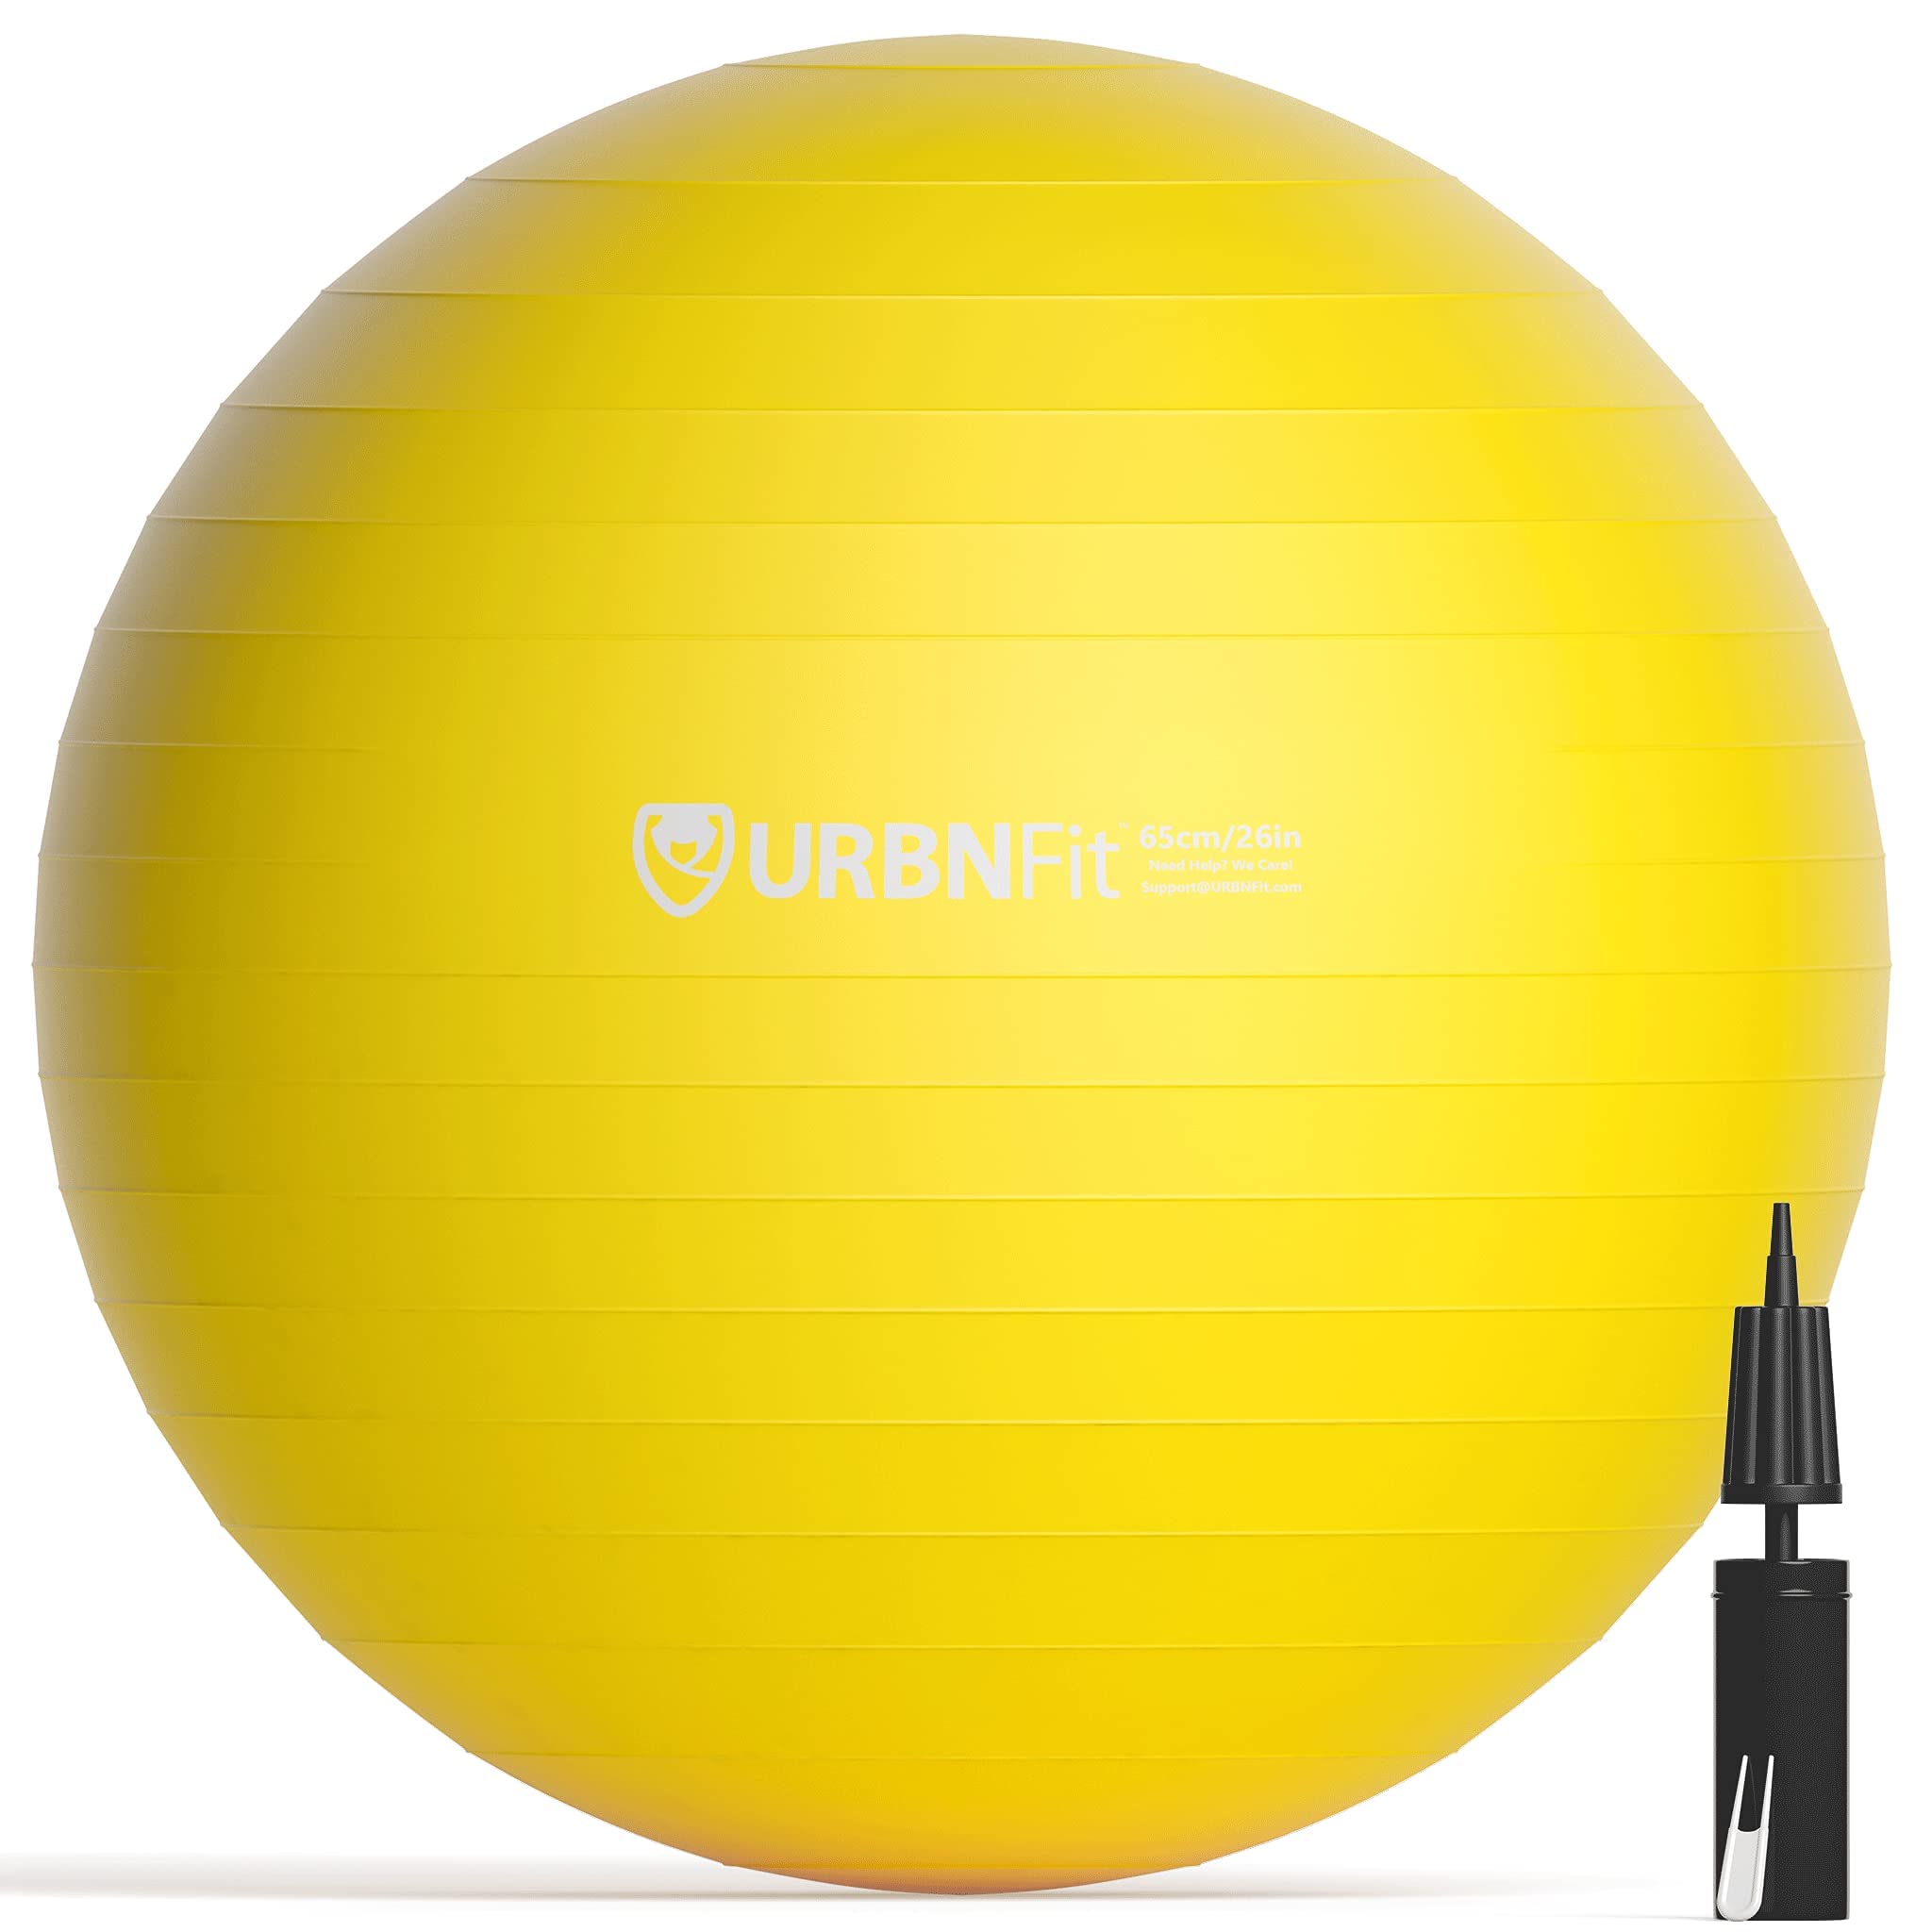 URBNFit Exercise Ball - Yoga Ball for Workout Pregnancy Stability - AntiBurst Swiss Balance Ball w/ Pump - Fitness Ball Chair for Office, Home Gym